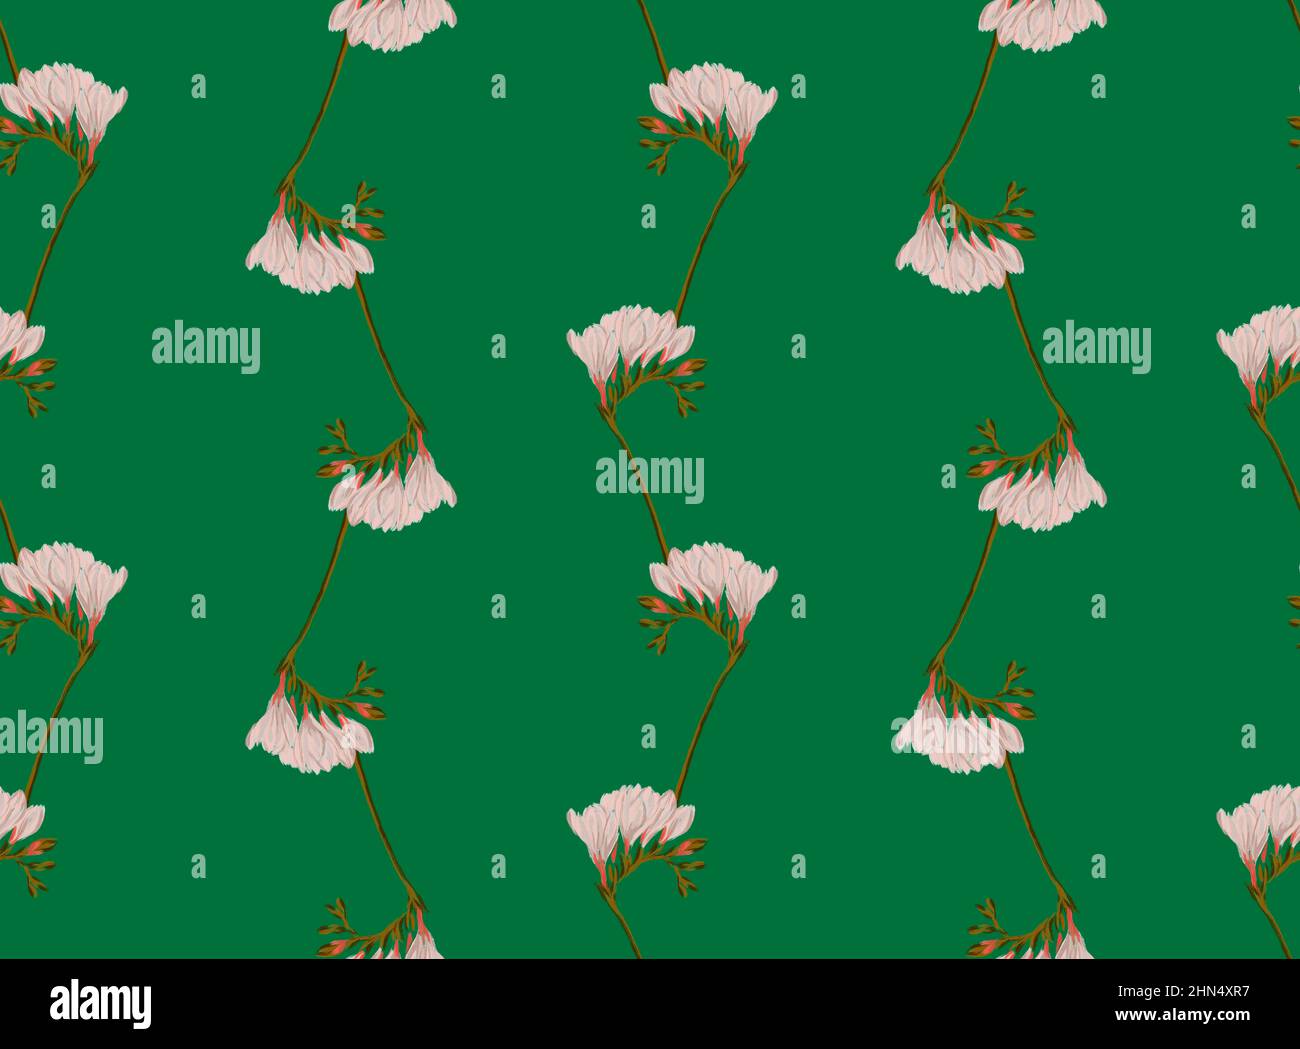 Freesia twig blooming with white flowers abstract seamless pattern illustraion on green background Stock Photo